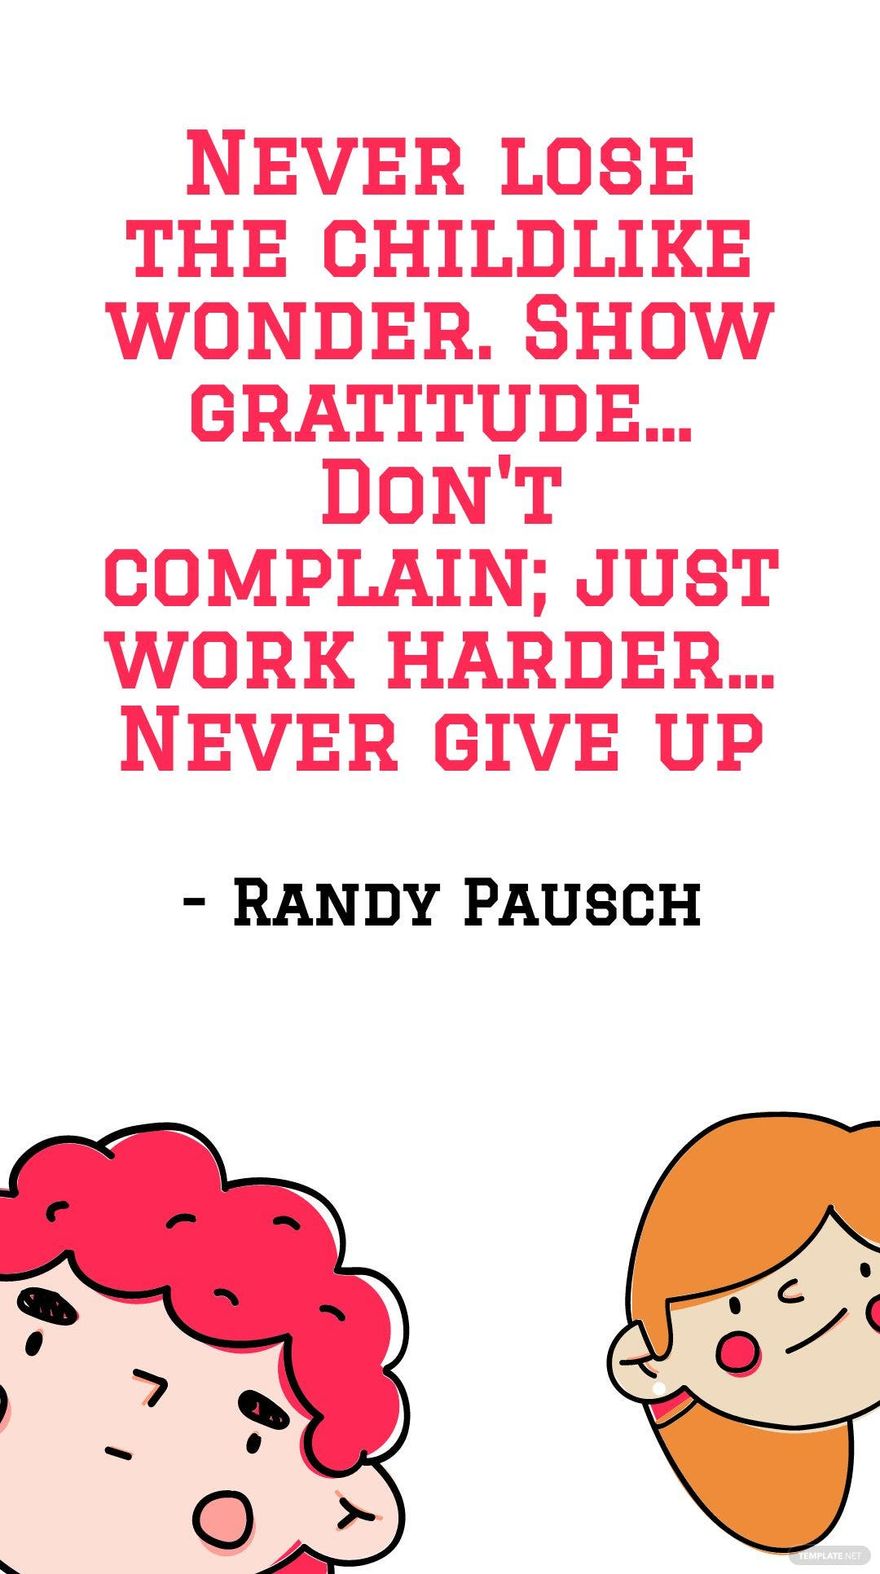 Free Randy Pausch - Never lose the childlike wonder. Show gratitude... Don't complain; just work harder... Never give up in JPG